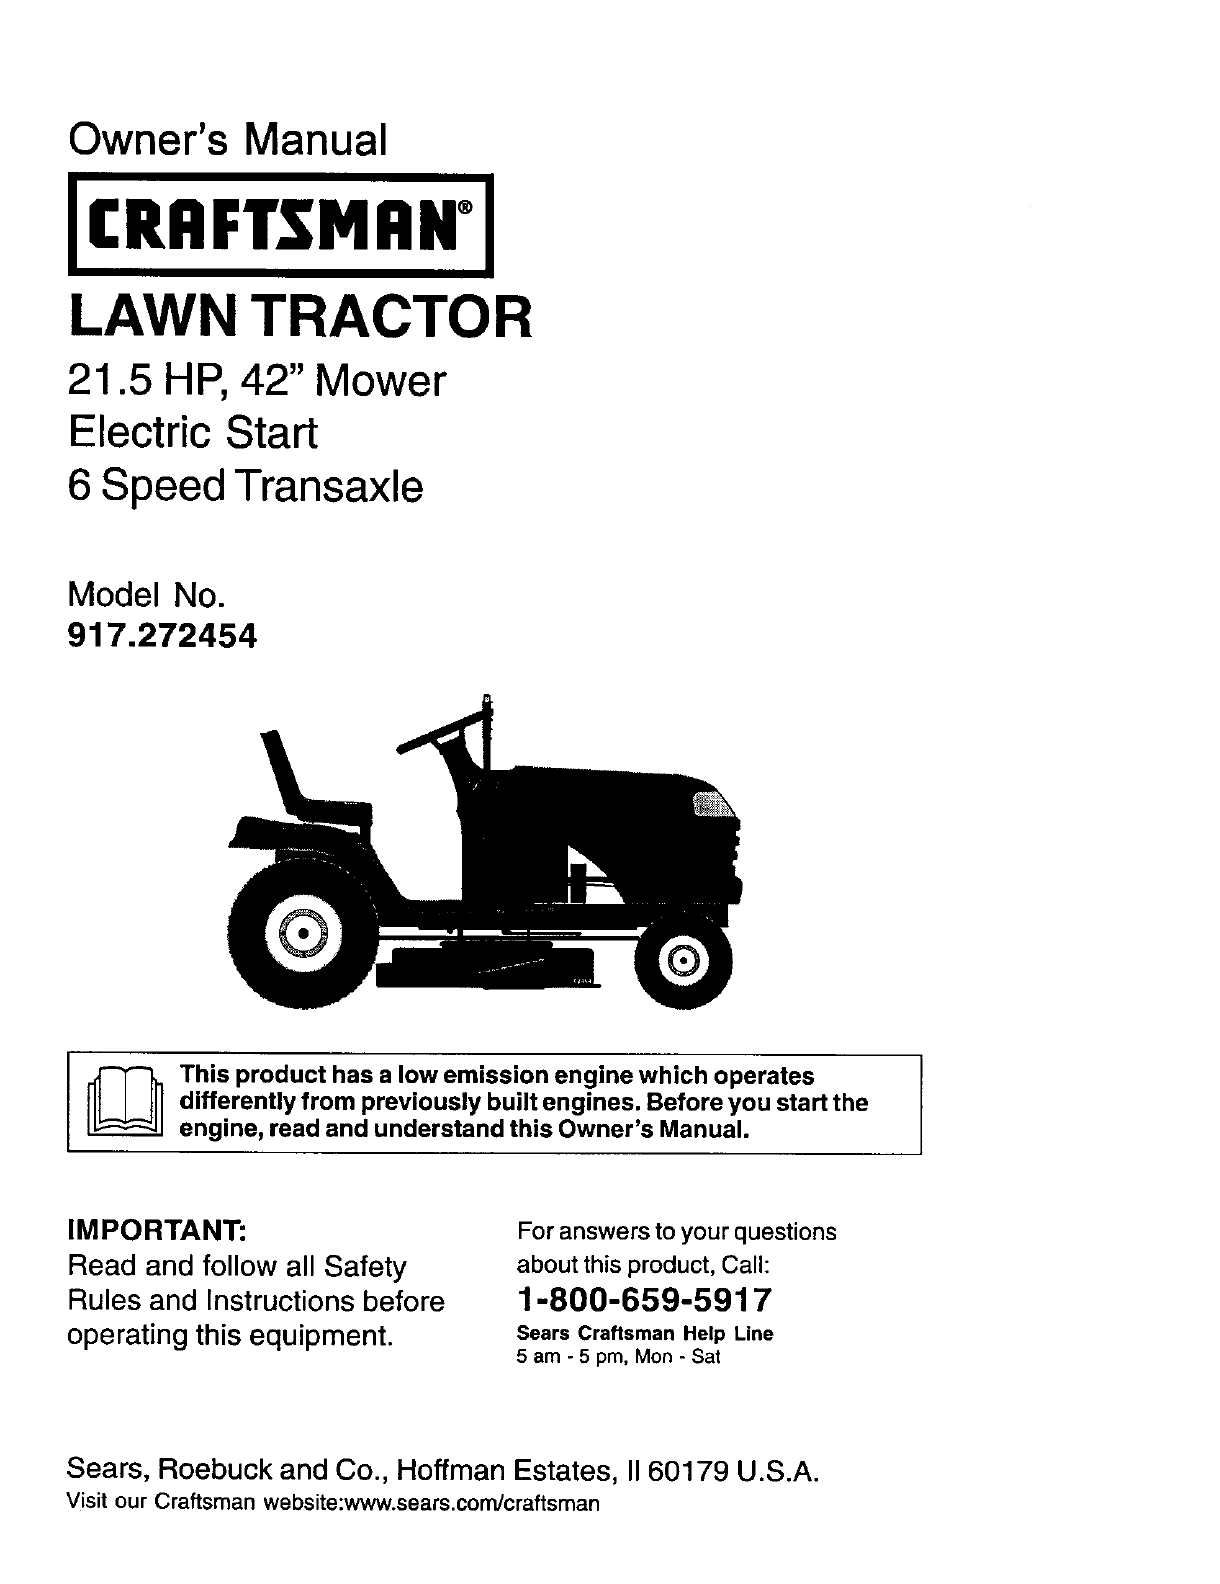 Craftsman 917272454 User Manual LAWN TRACTOR Manuals And Guides L0206261